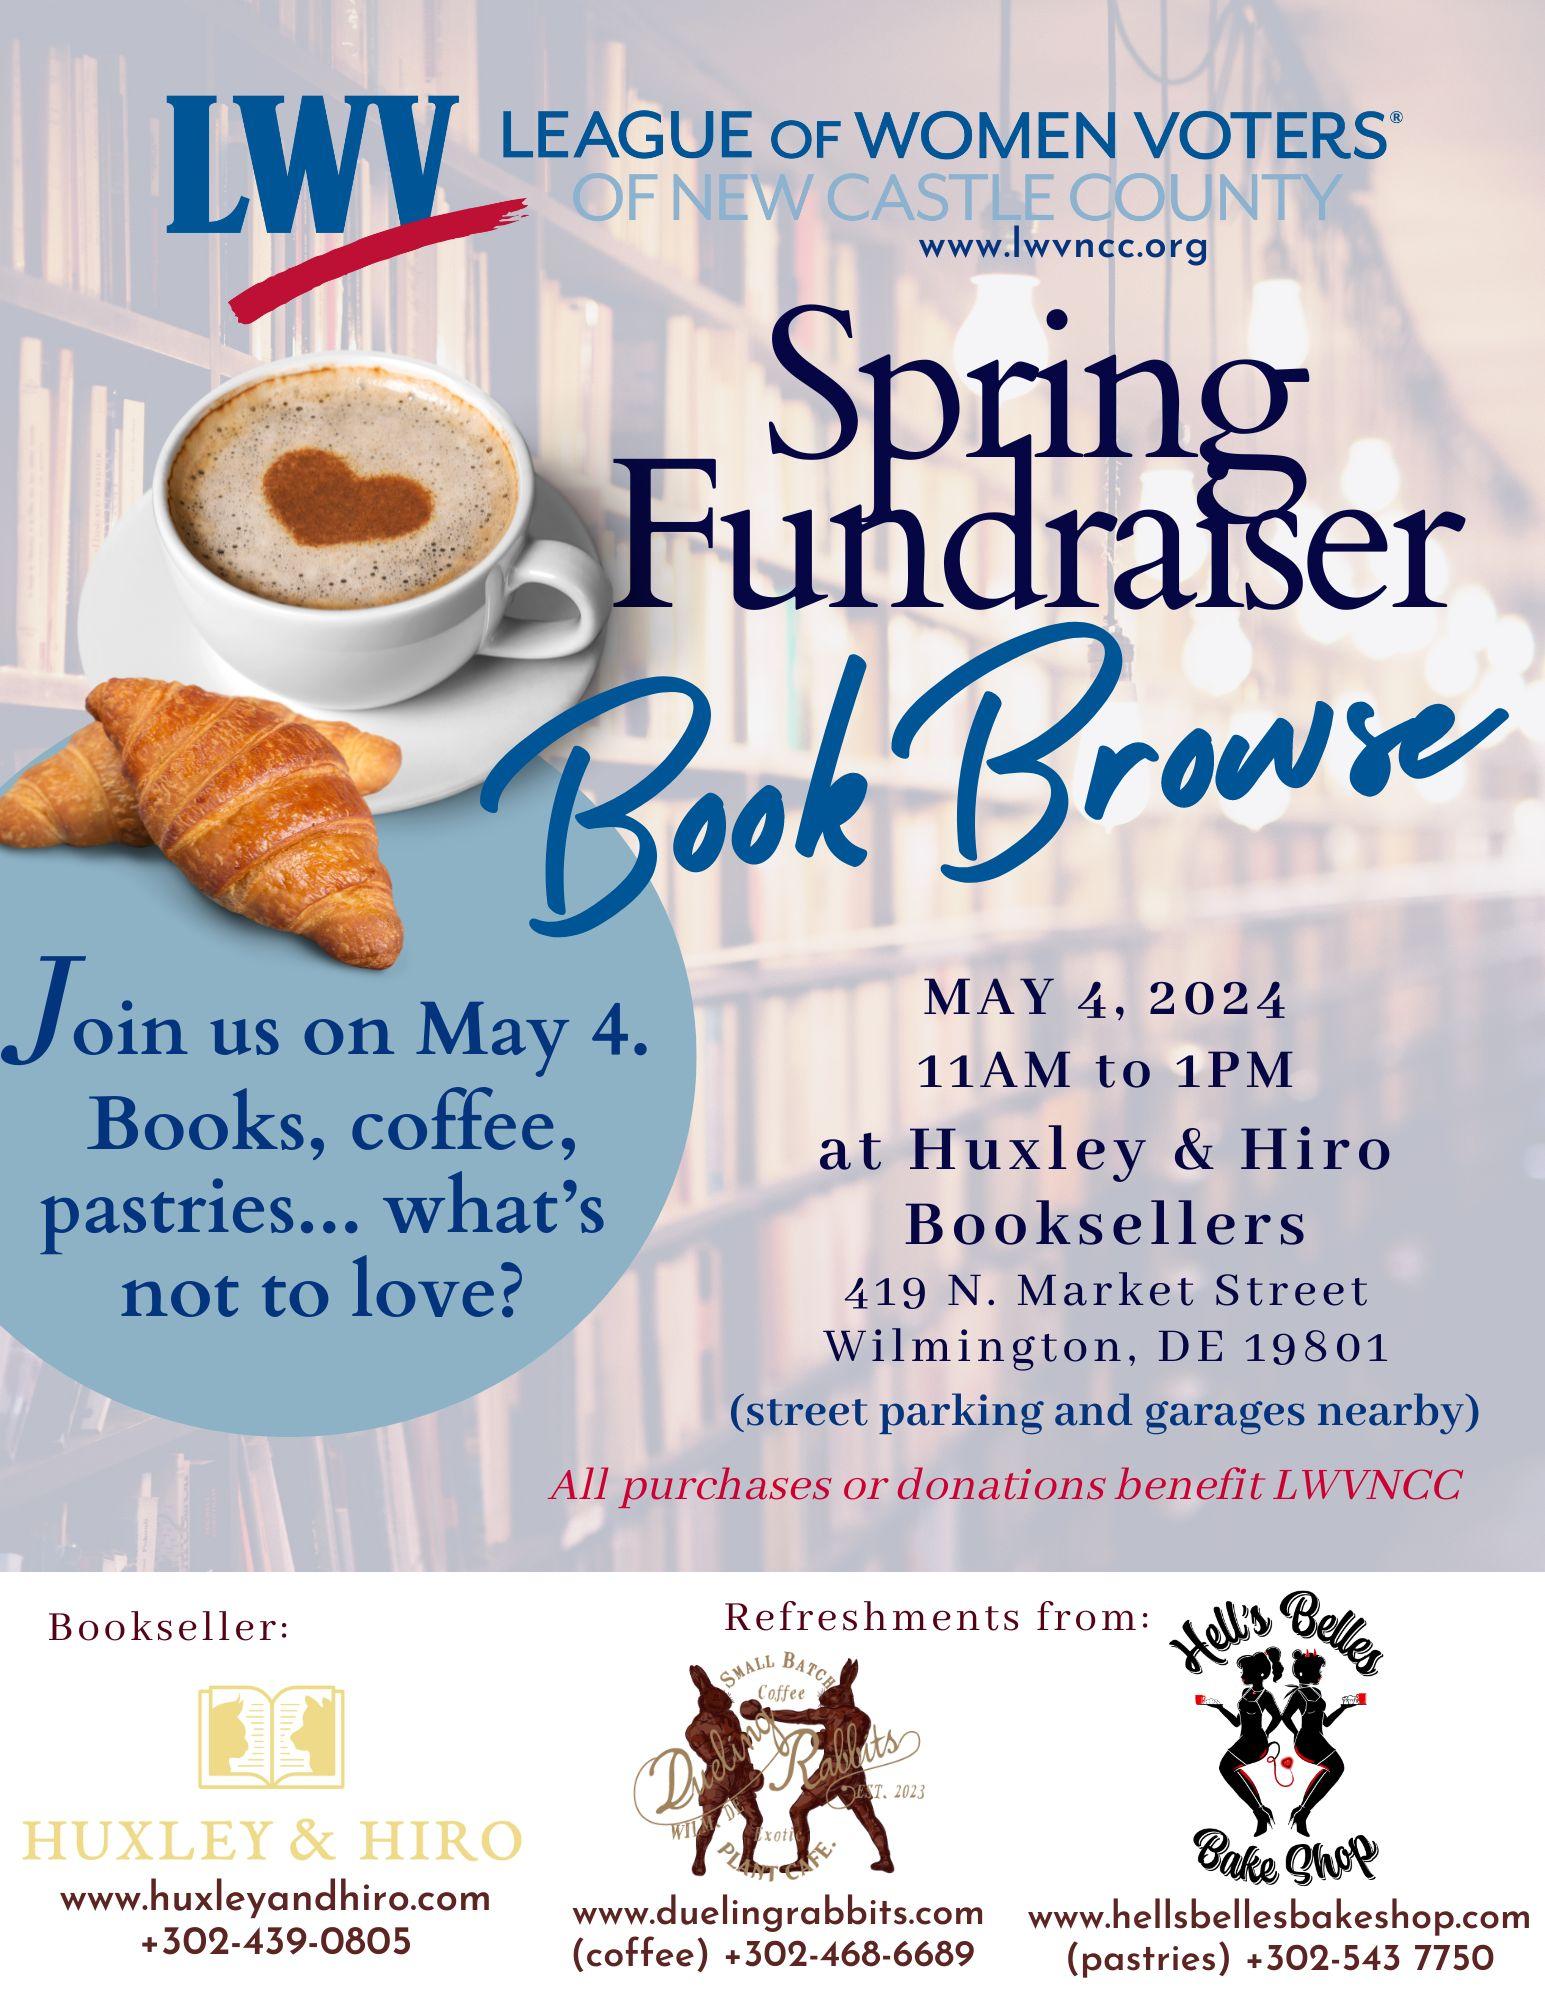 LWVNCC Spring Fundraiser Book Browse. Join us on May 4. Books, Coffee, Pastries... what's not to love?